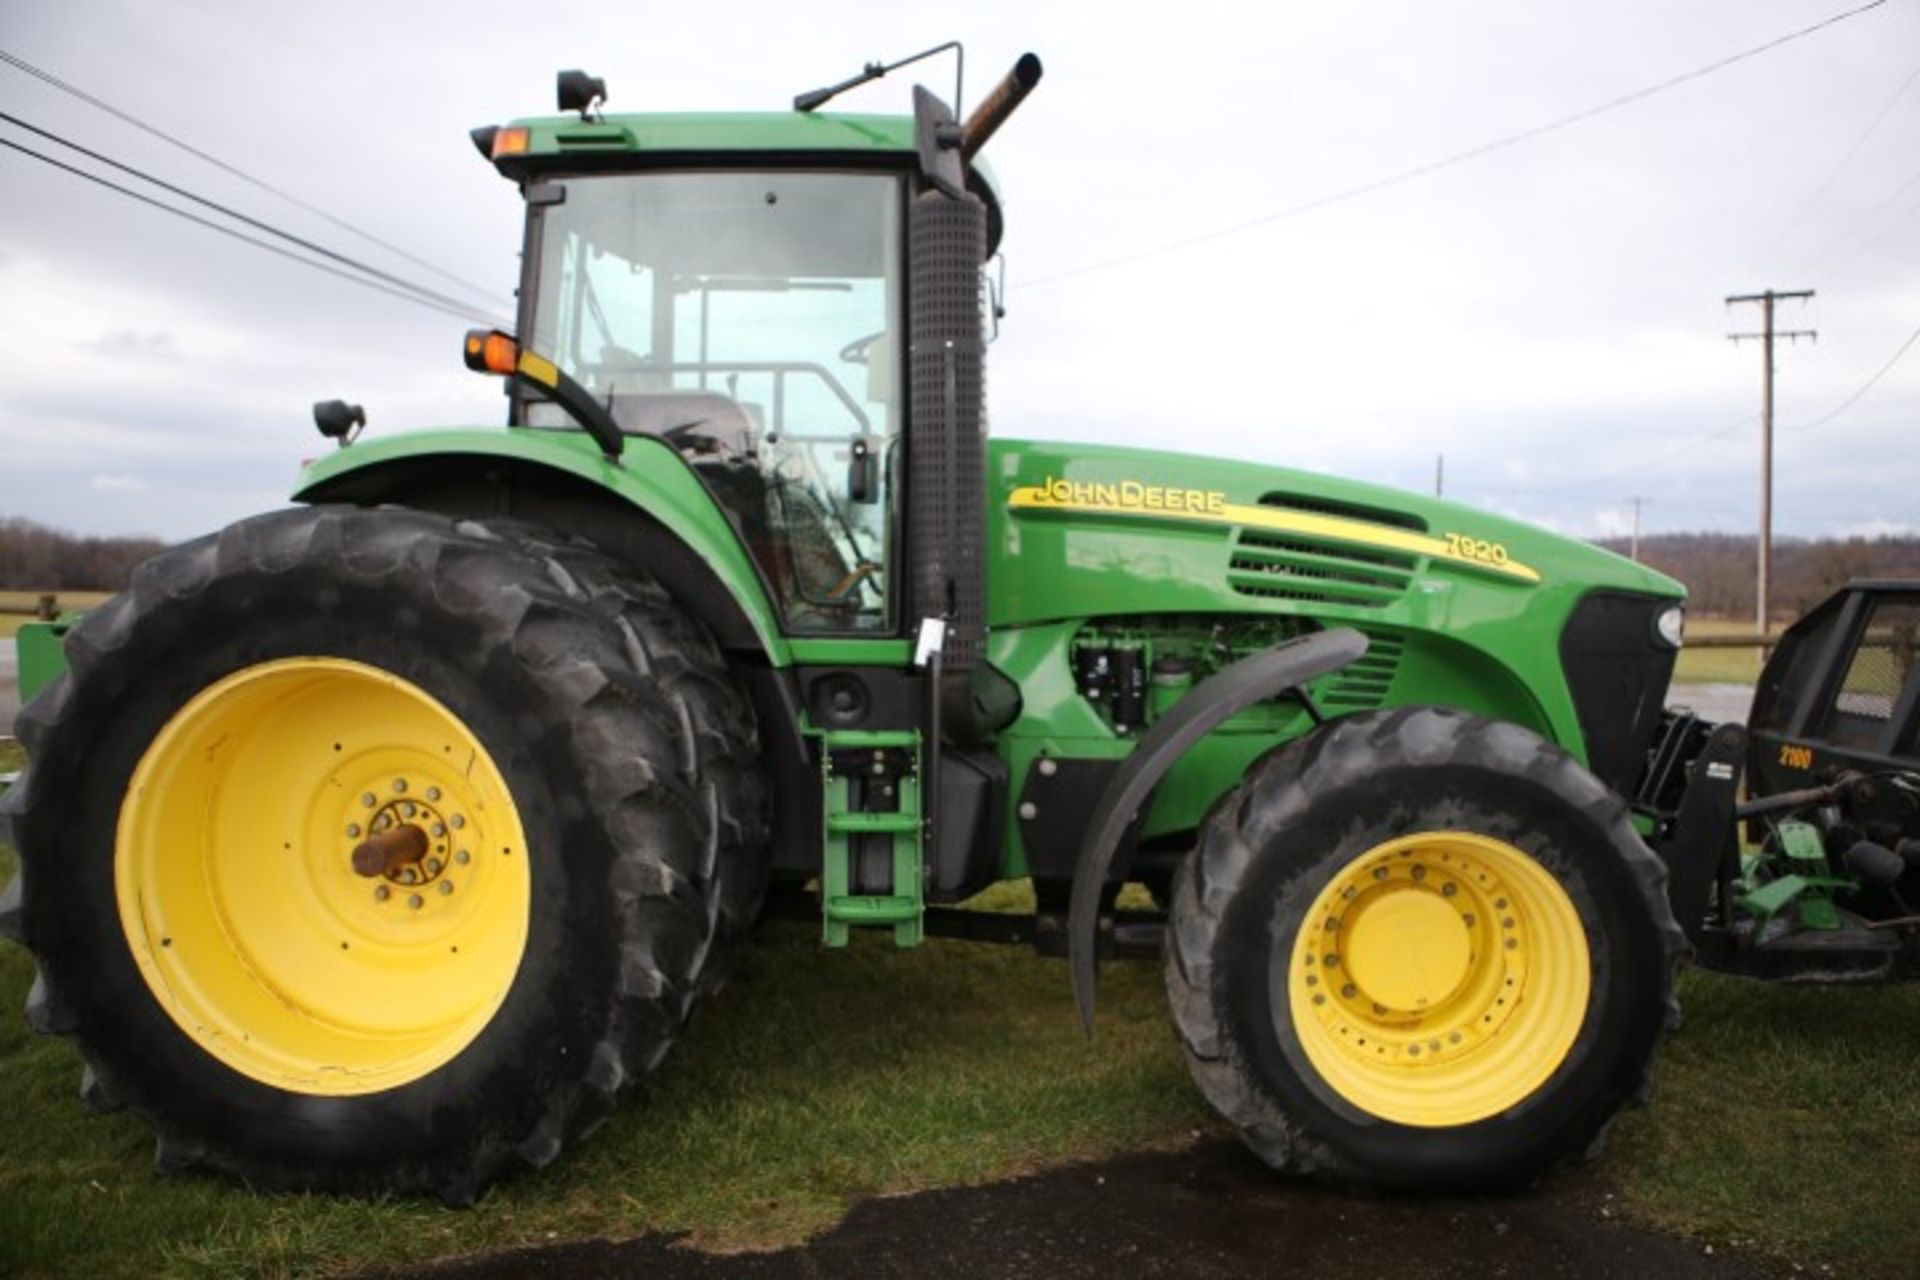 05 JD 7920 W/GROUSER 2100 12' SILAGE BLADE, 4WD, 4,500 HRS, W/ 20.8R42 DUALS, IVT,REVERSER, REAR - Image 2 of 12